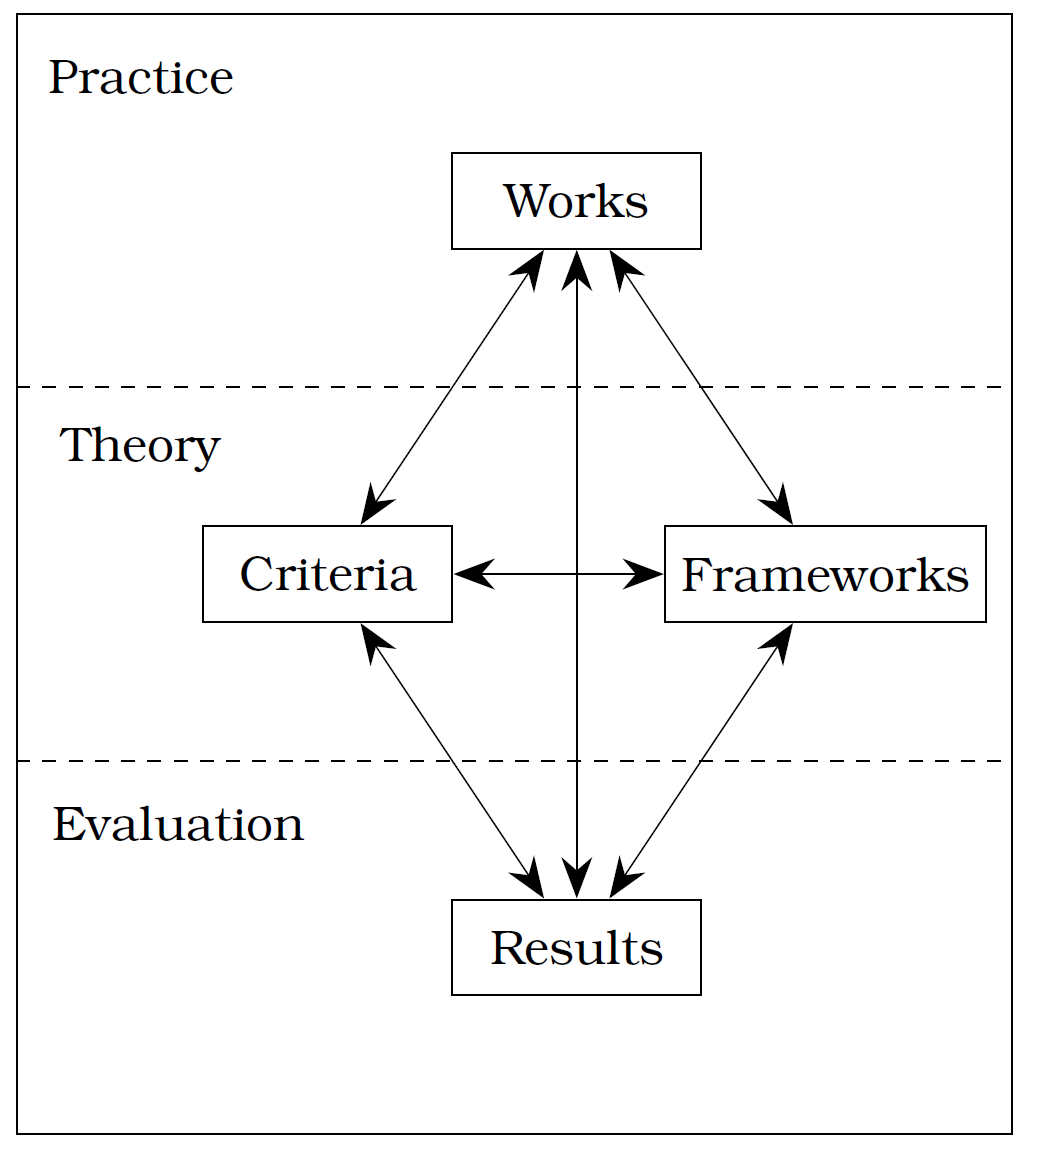 Edmonds and Candy's trajectory model (TMPR)